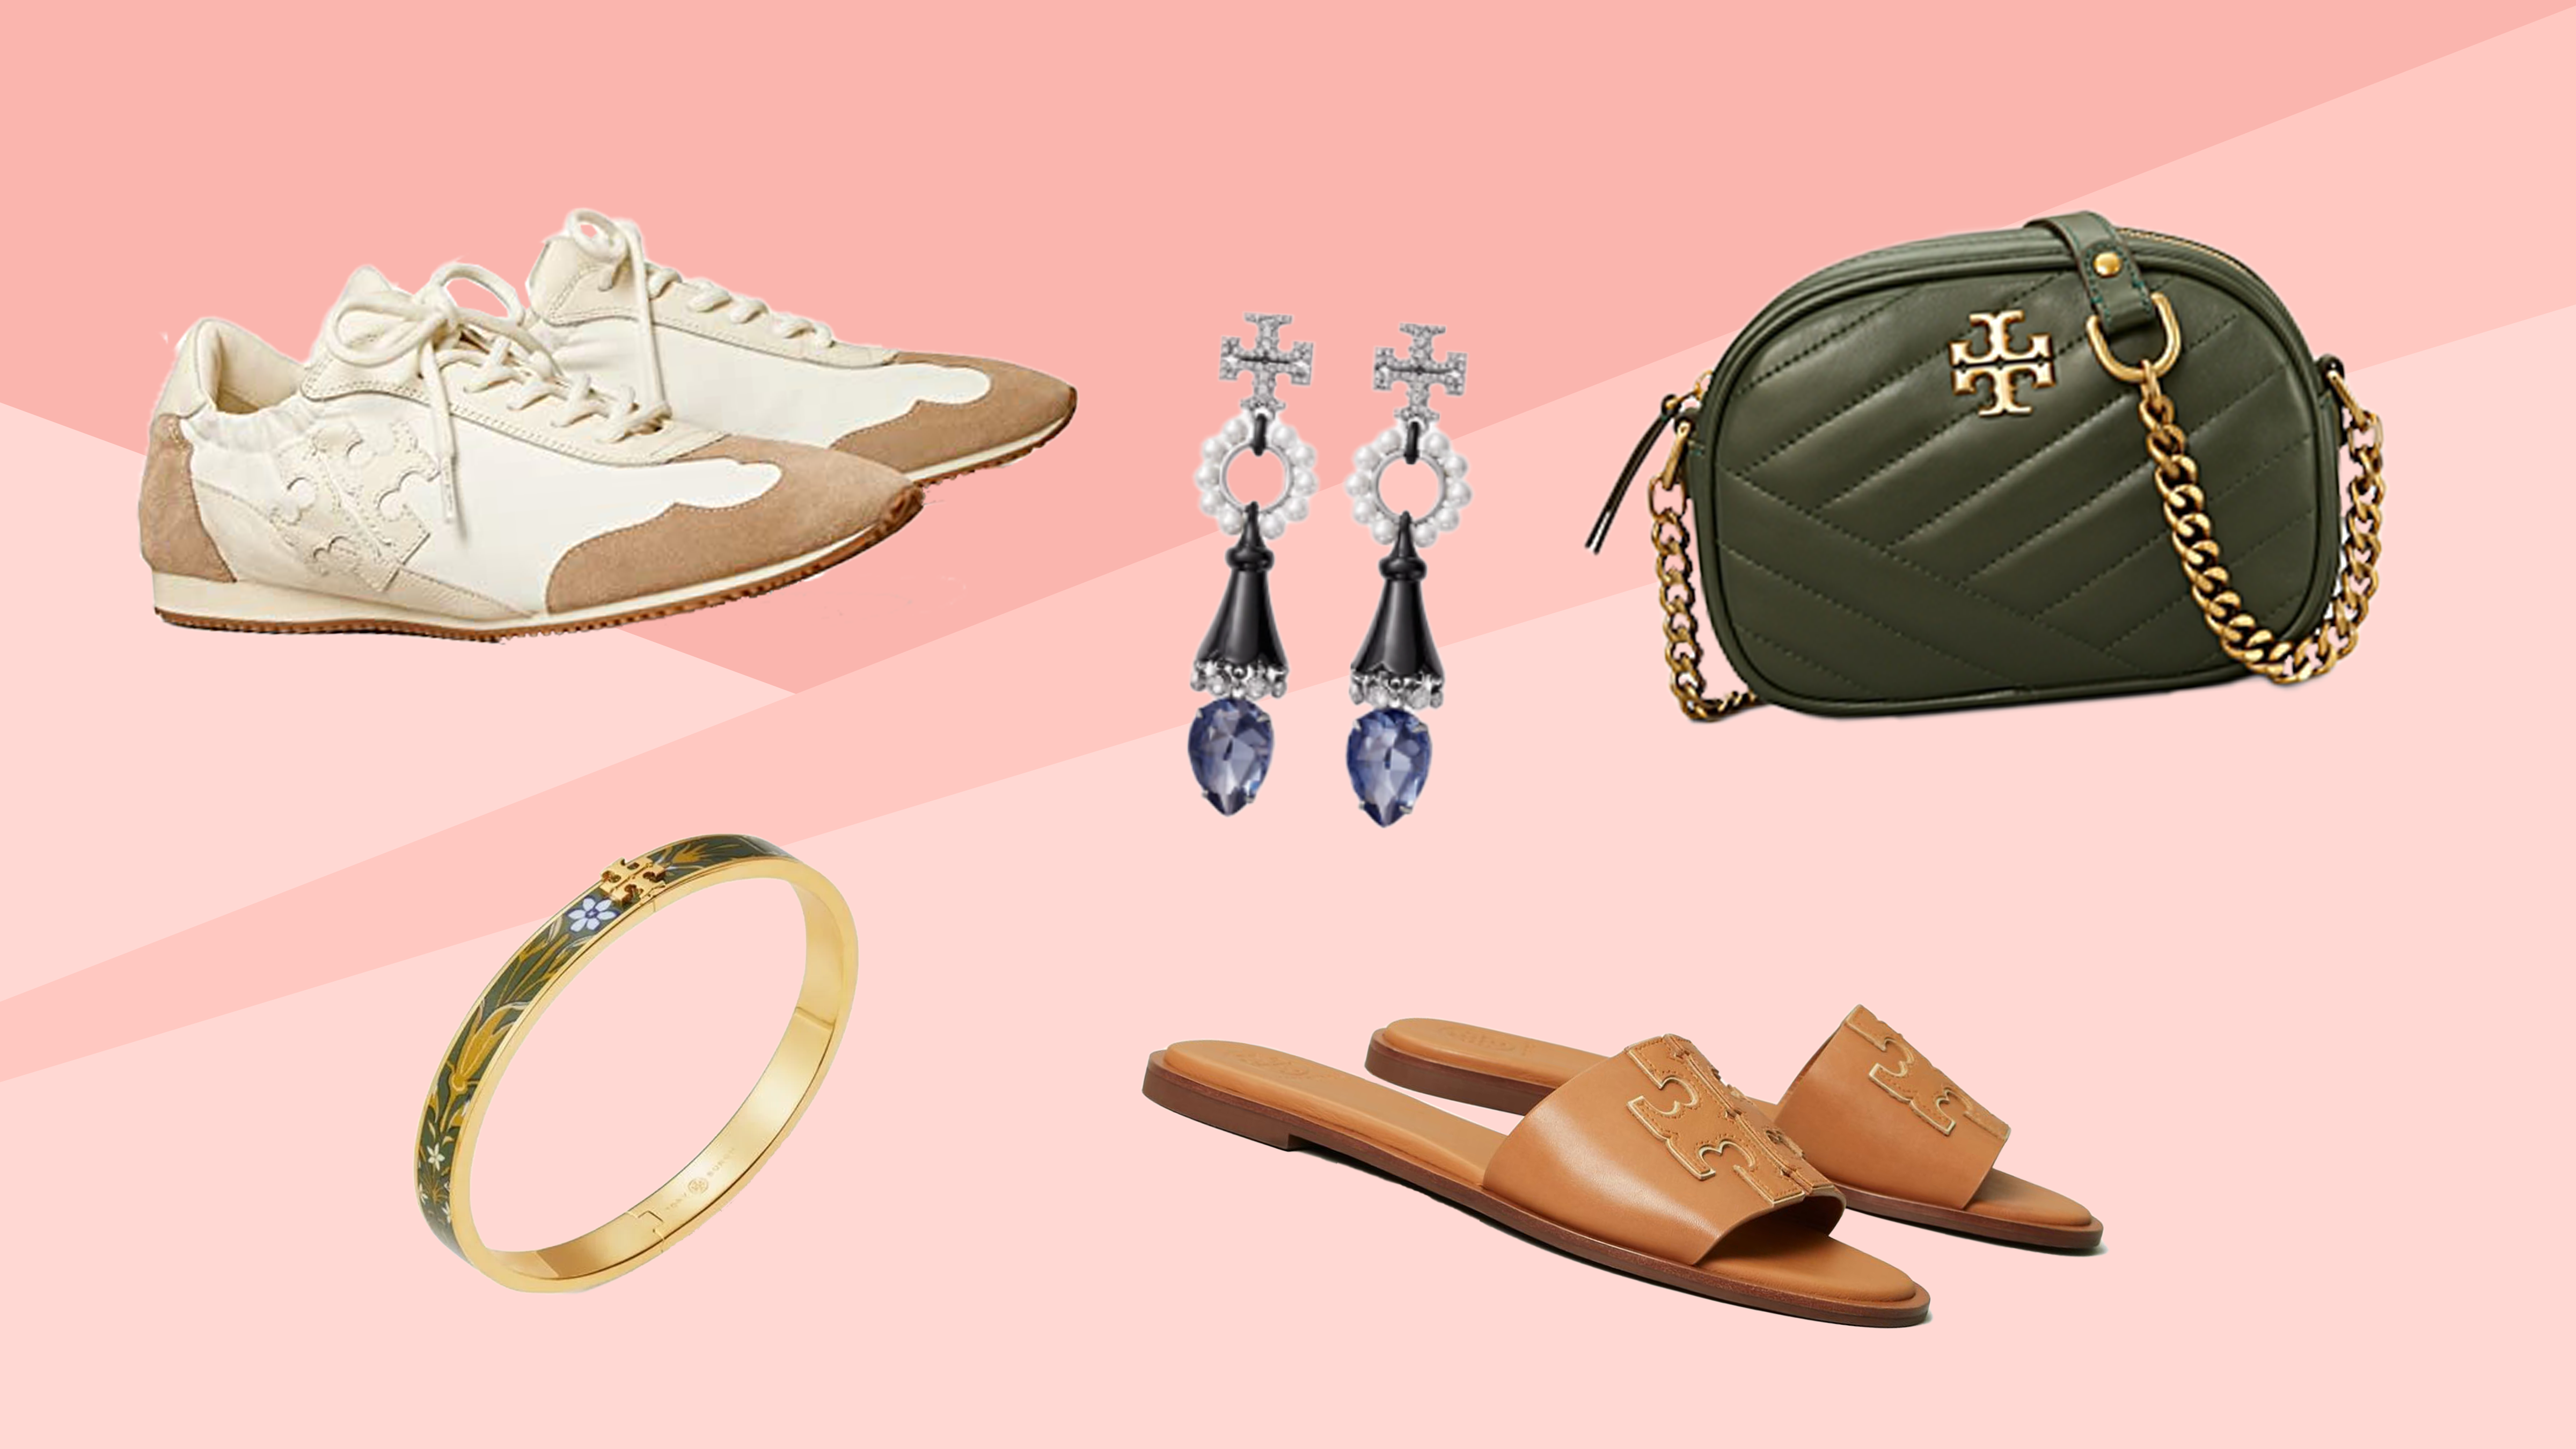 Tory Burch: Save big on purses, shoes and clothing for spring